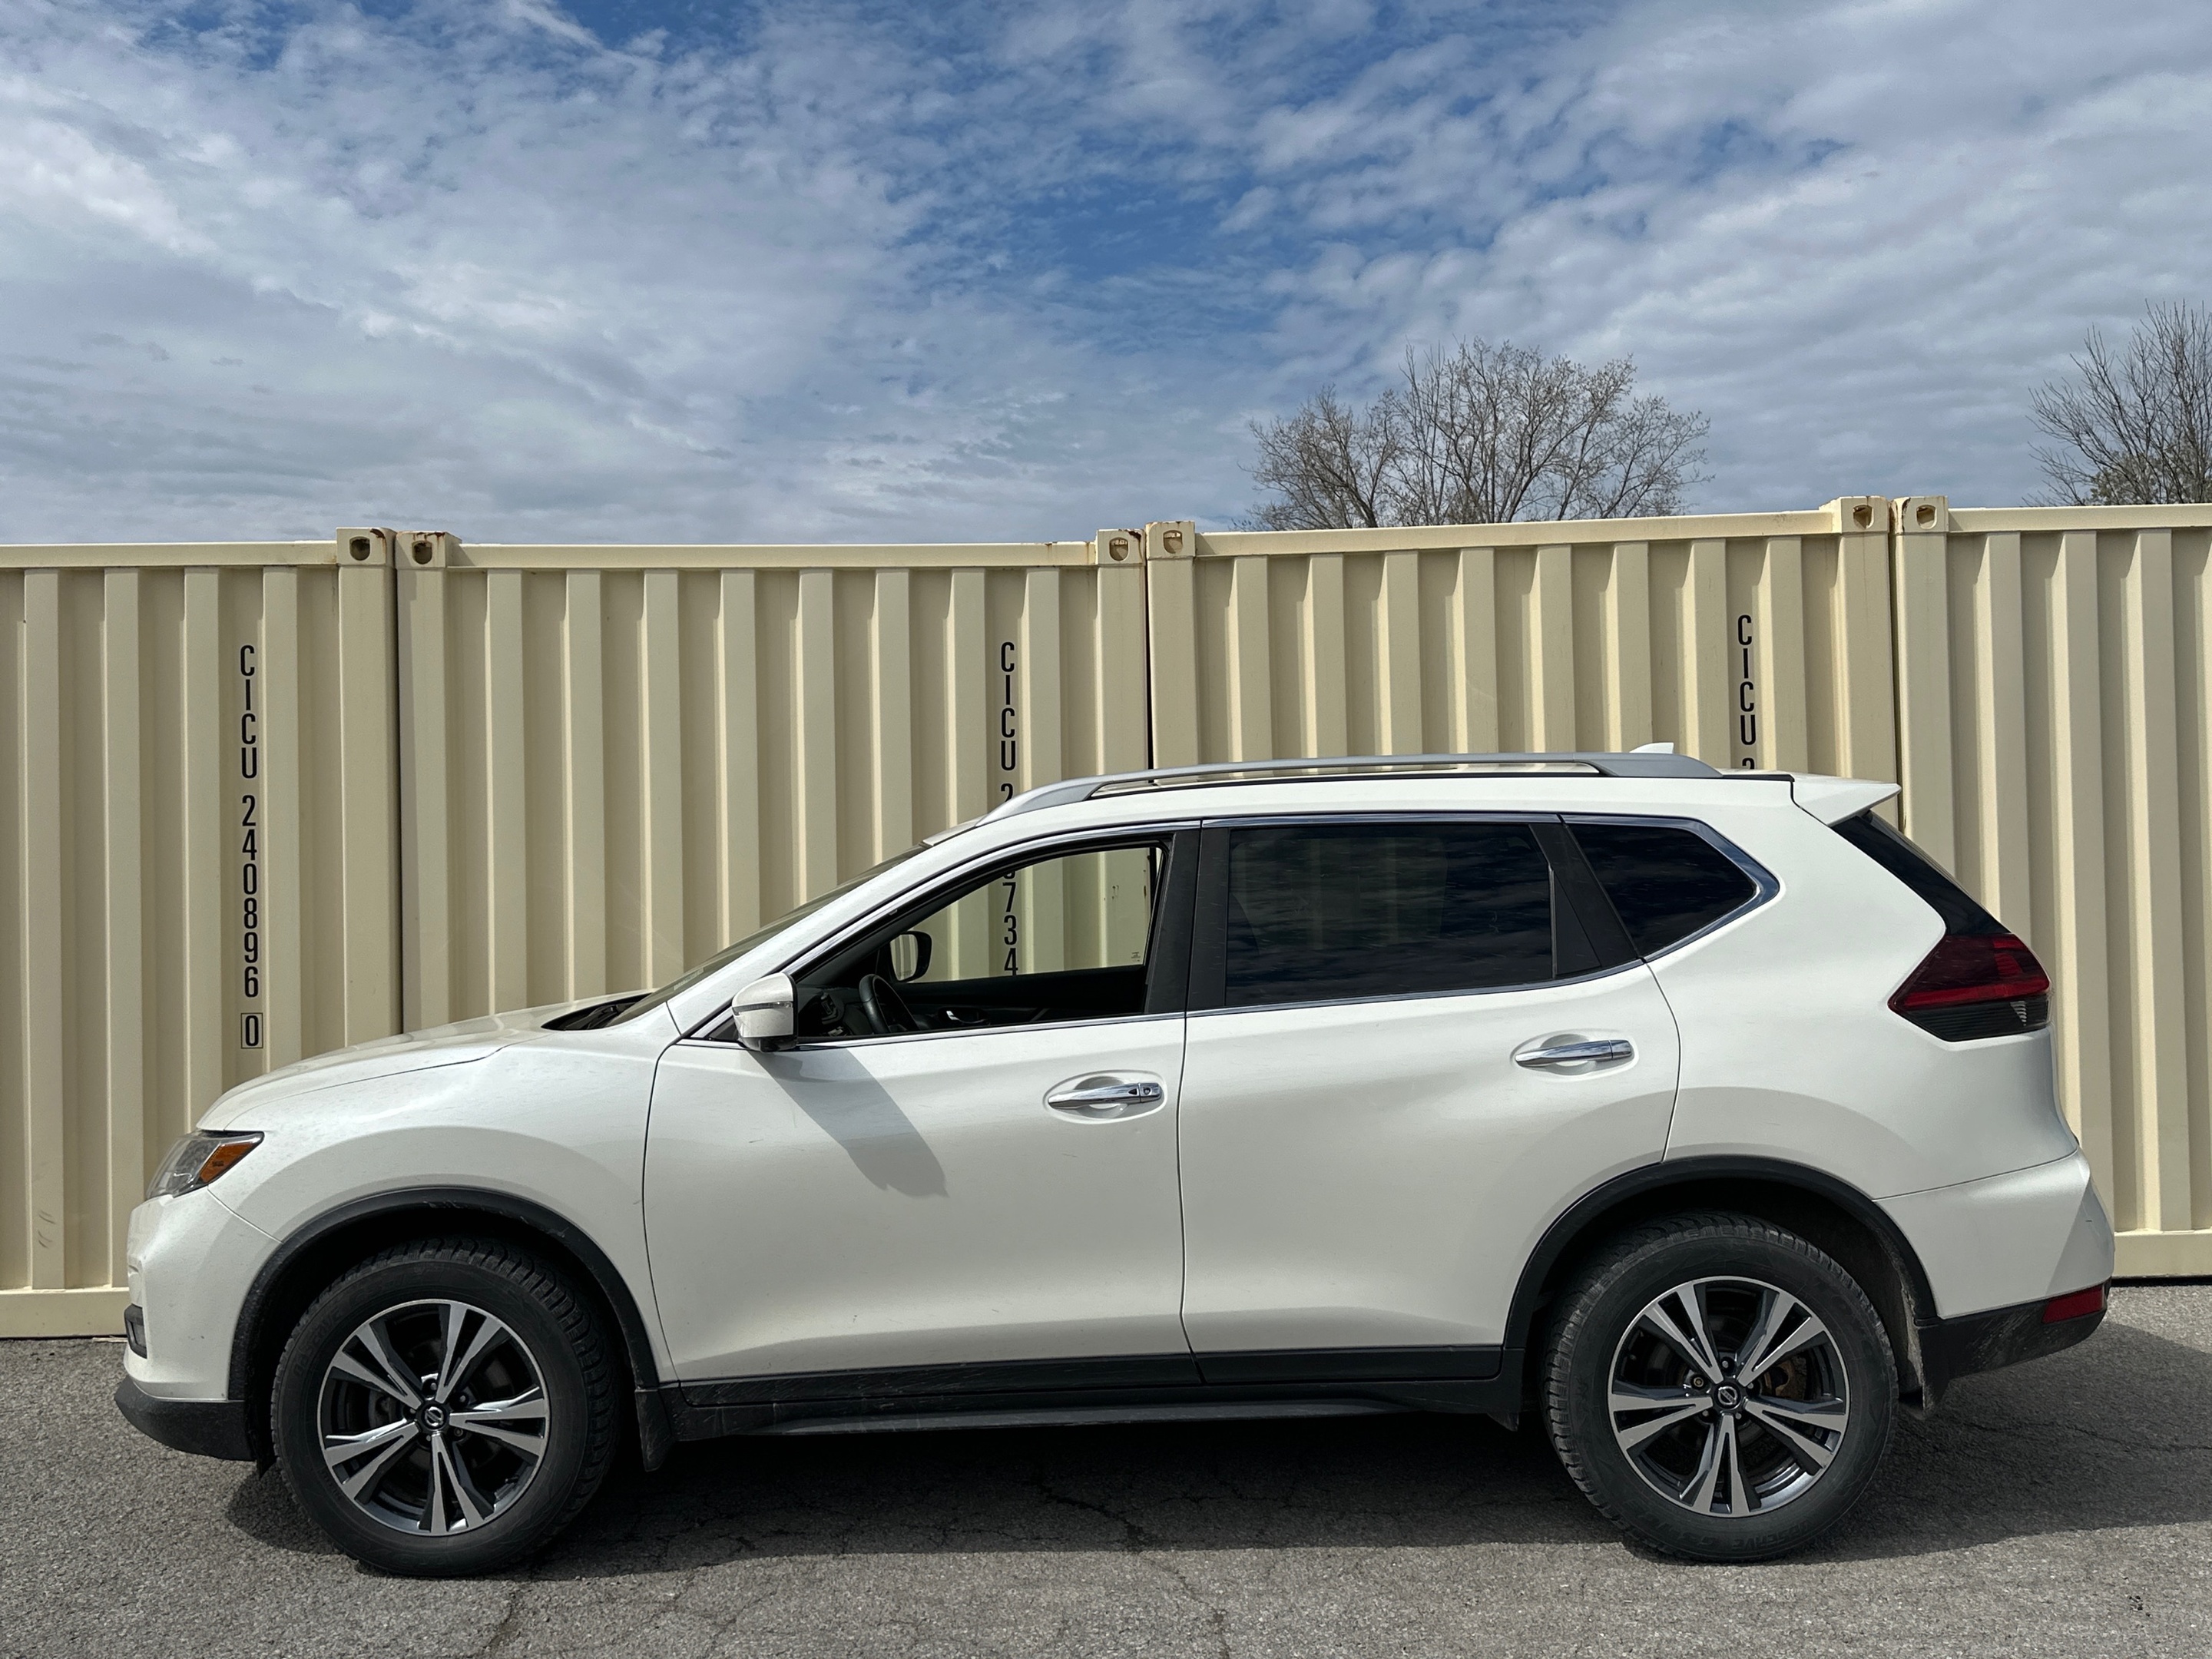 2019 Nissan Rogue SV AWD PANO! NAVI! 1 OWNER LEASE!